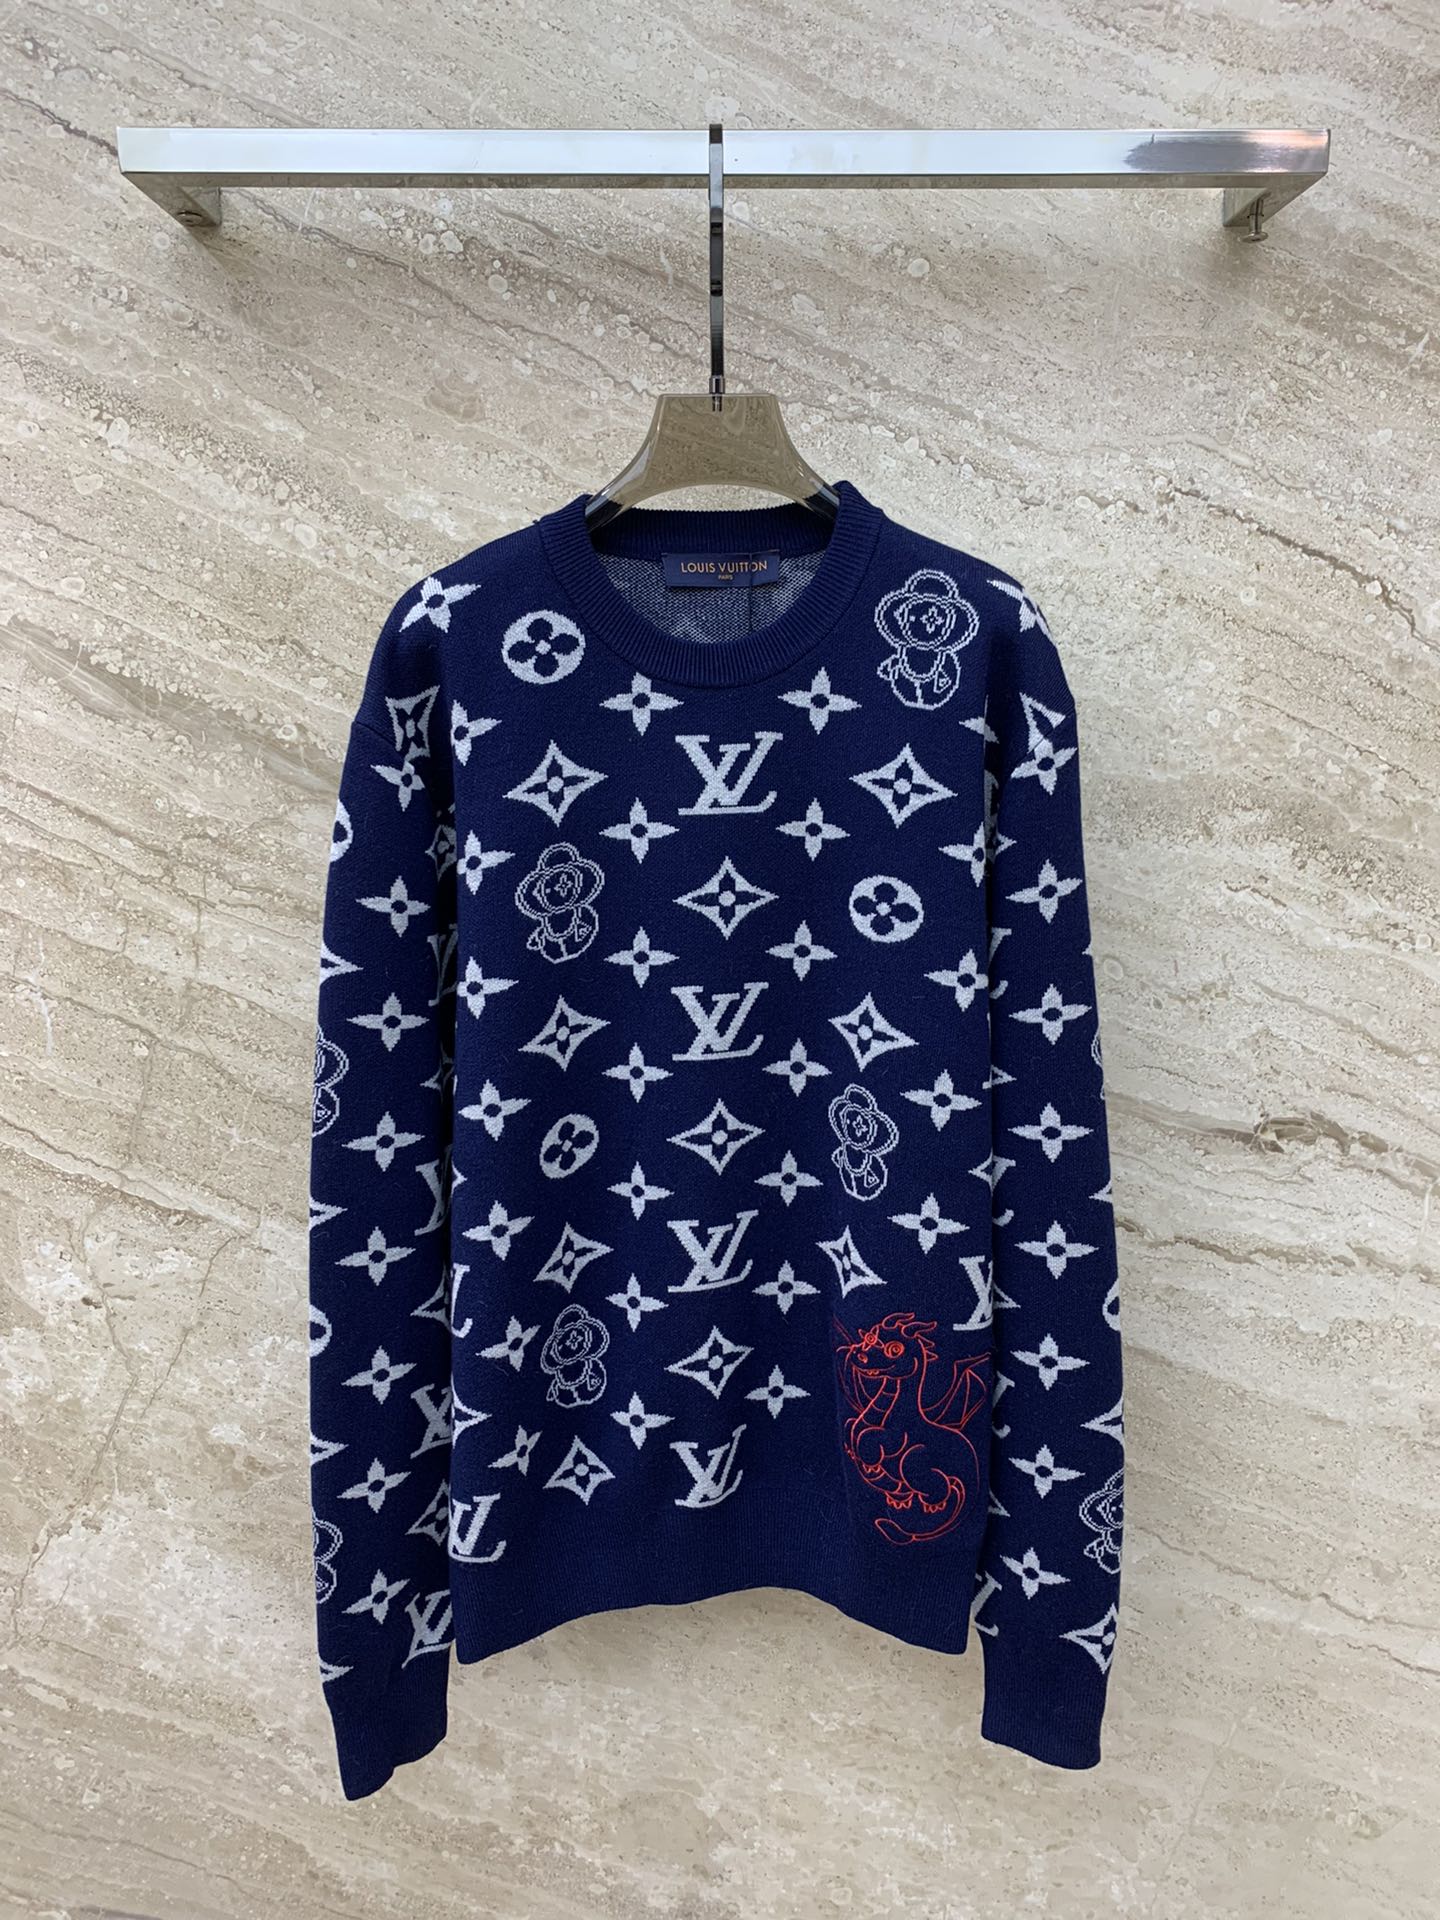 Louis Vuitton Clothing Knit Sweater Sweatshirts Unisex Knitting Spring Collection